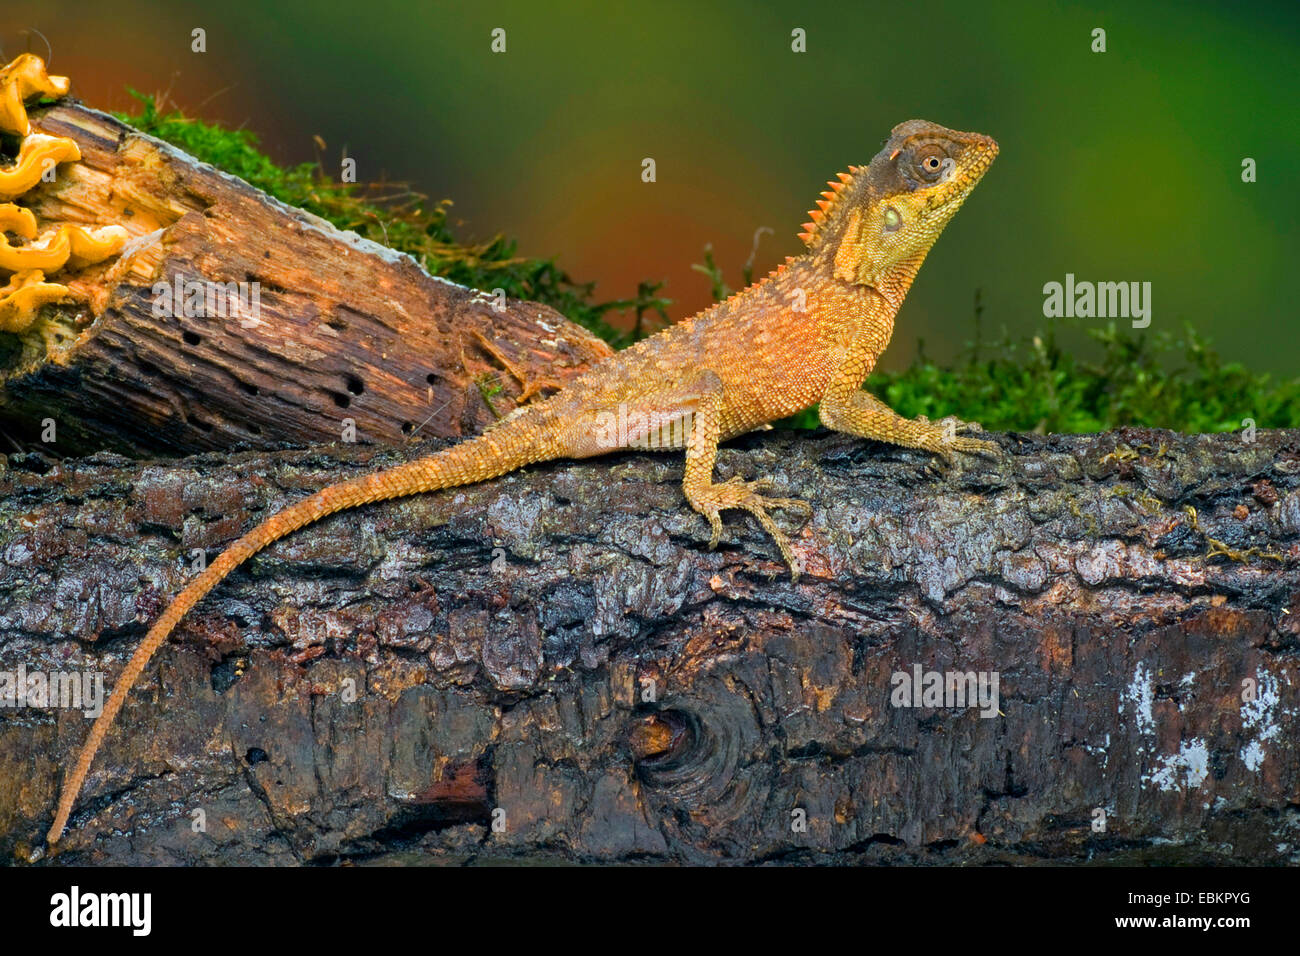 Green Pricklenape (Acanthosaura capra), young animal sitting on mossy deadwood Stock Photo